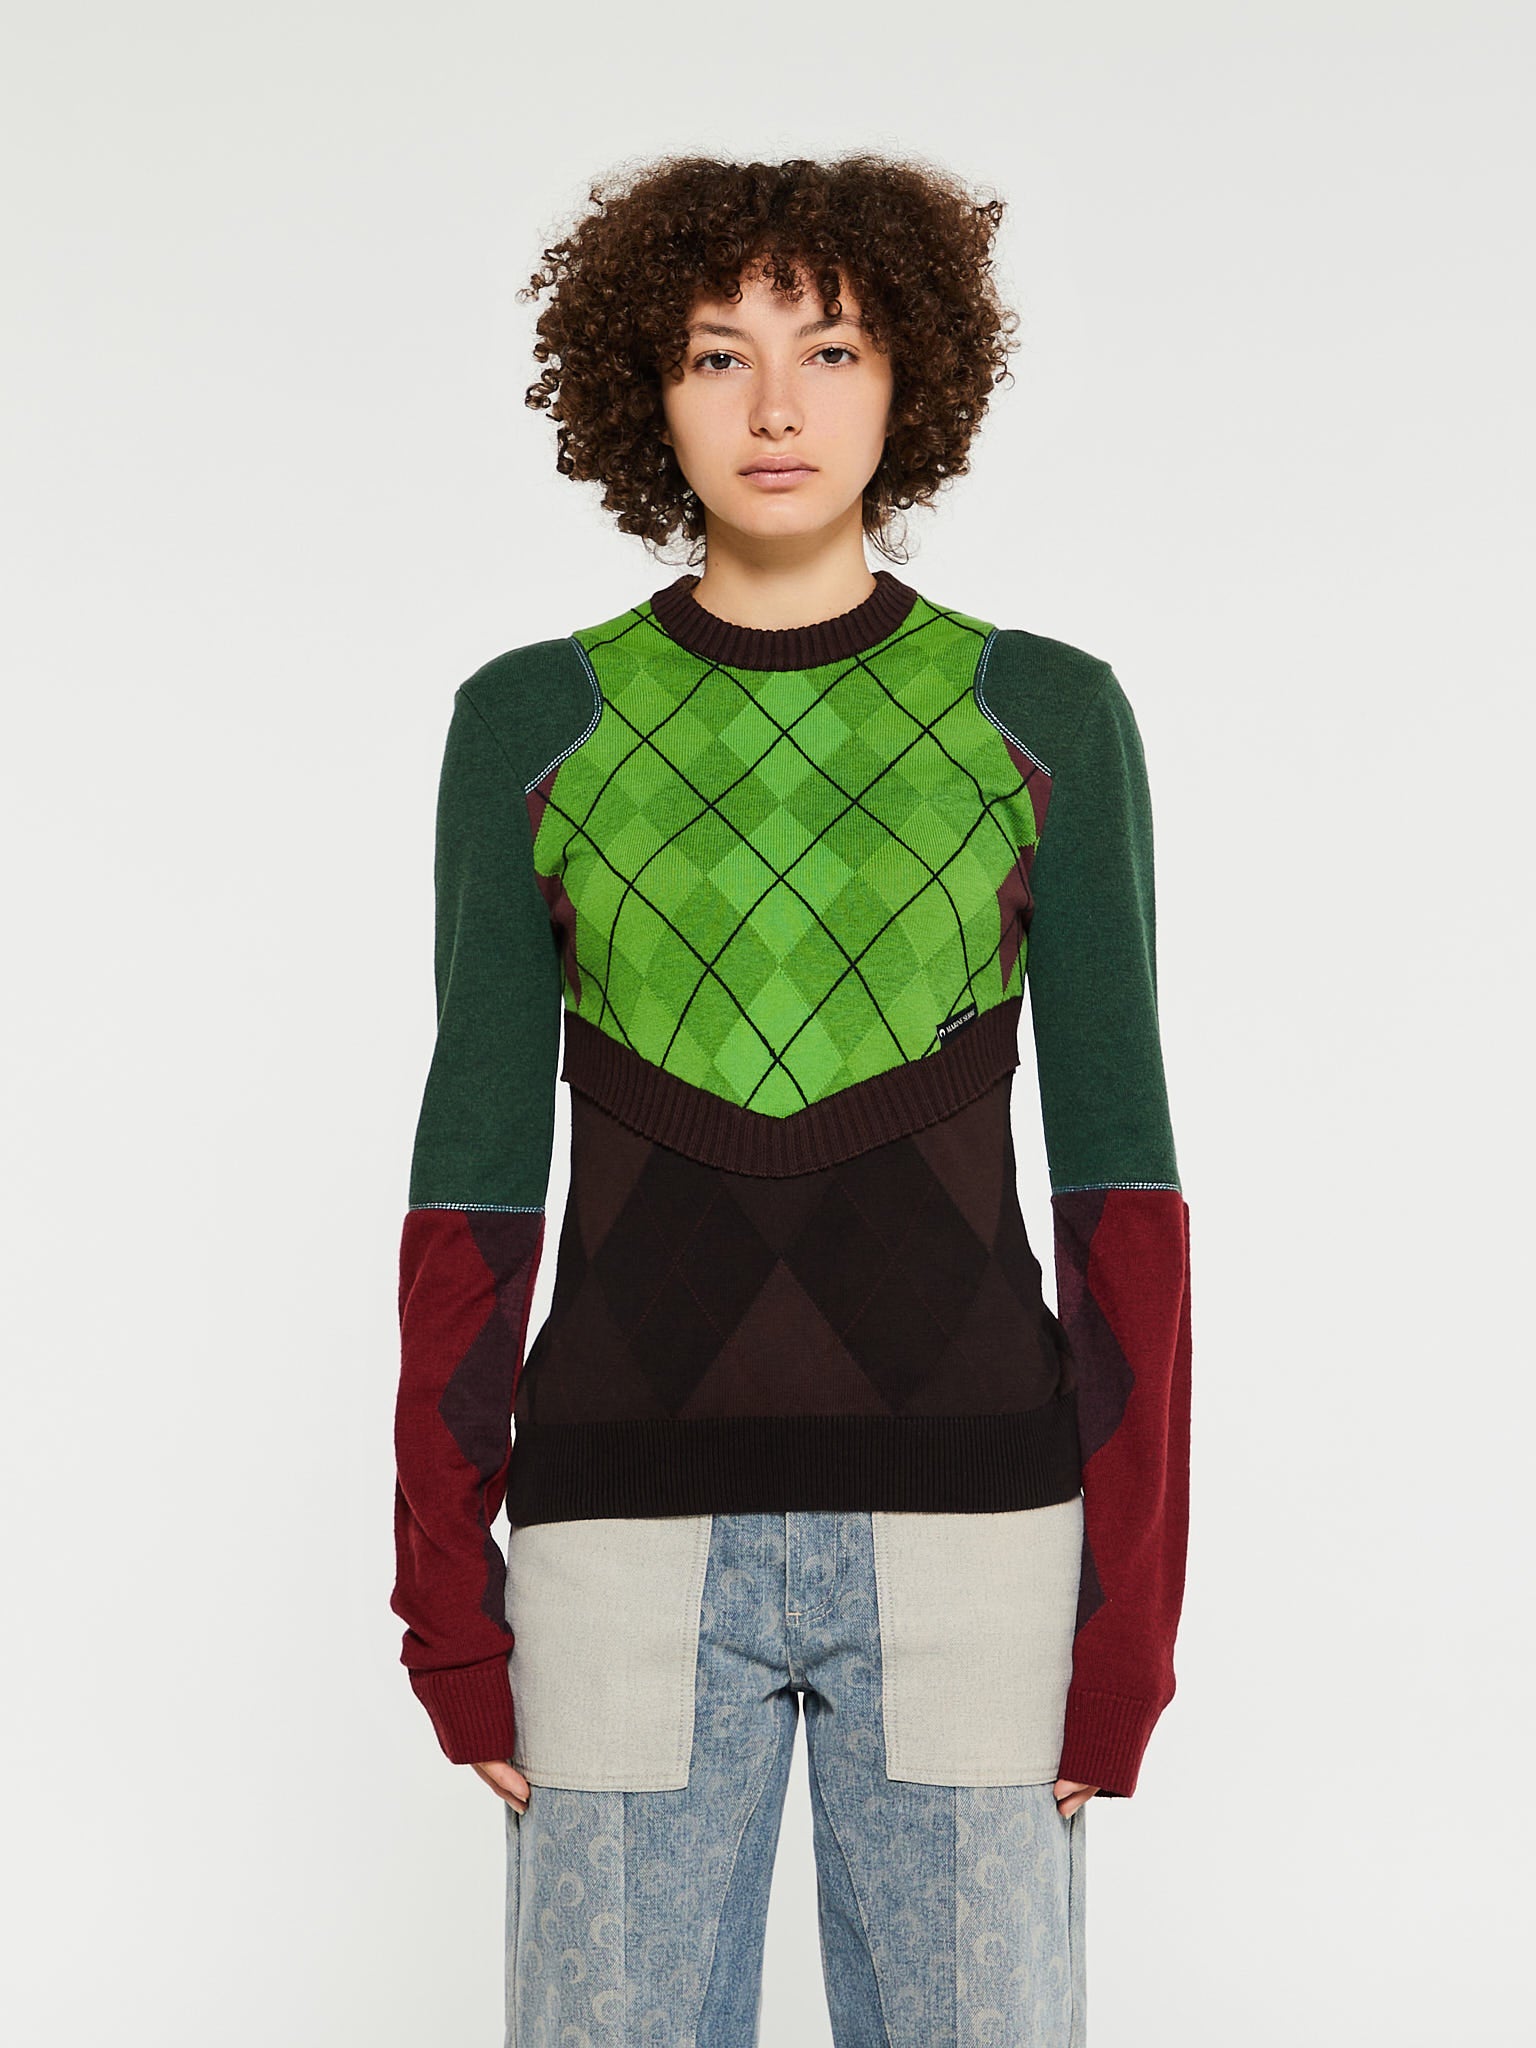 Marine Serre - Regenerated Lozenge Knit Crewneck Pullover in Green and Brown